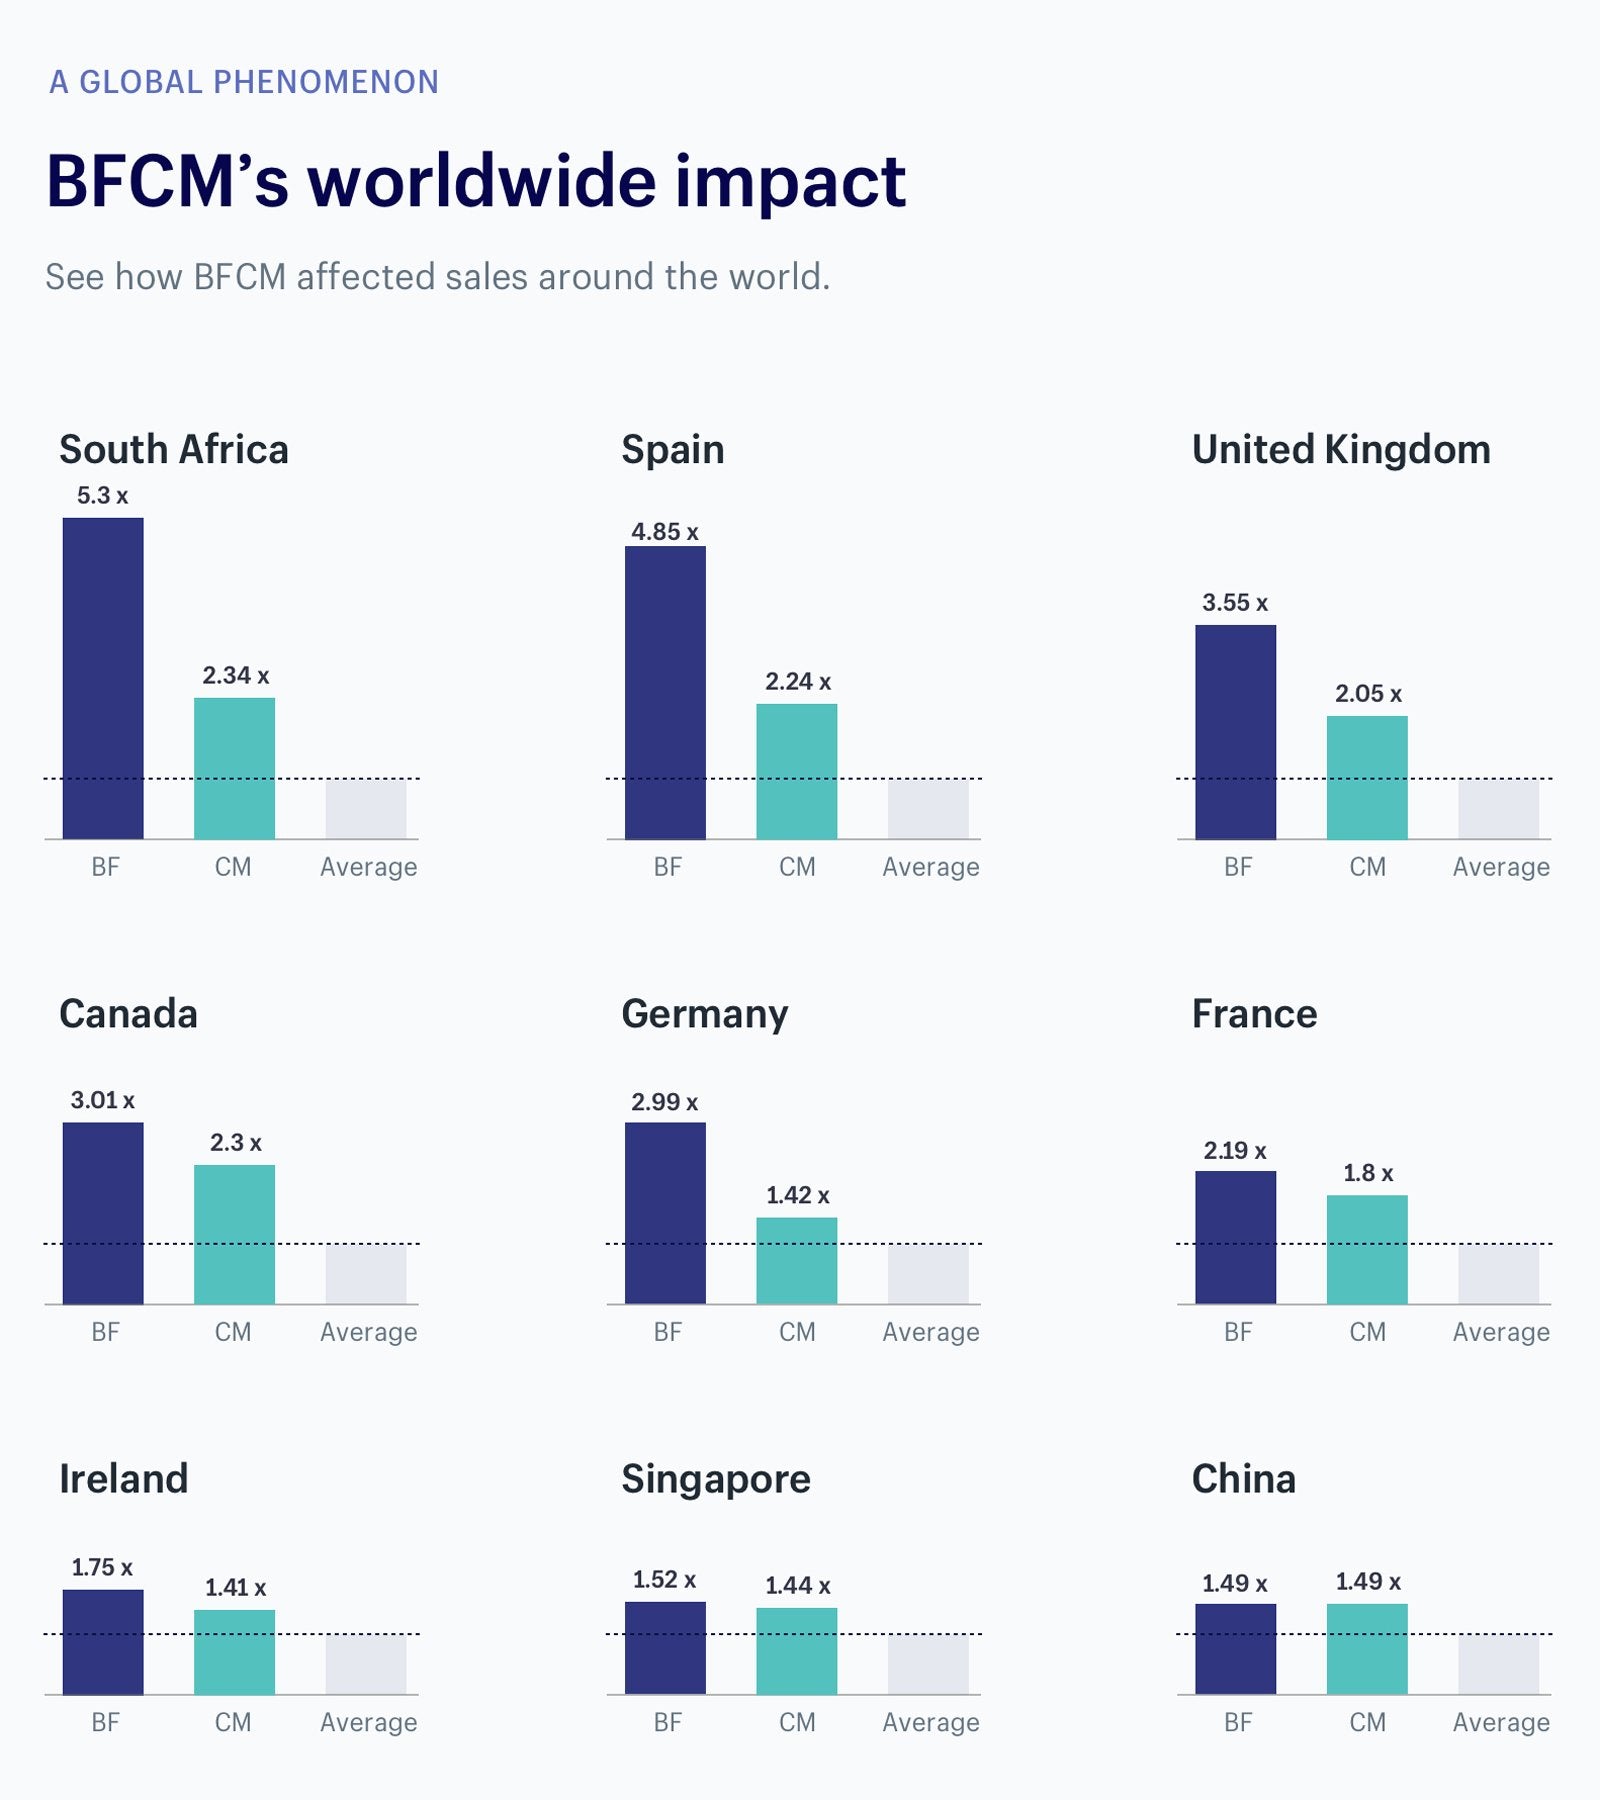 The impact of BFCM on sales around the world